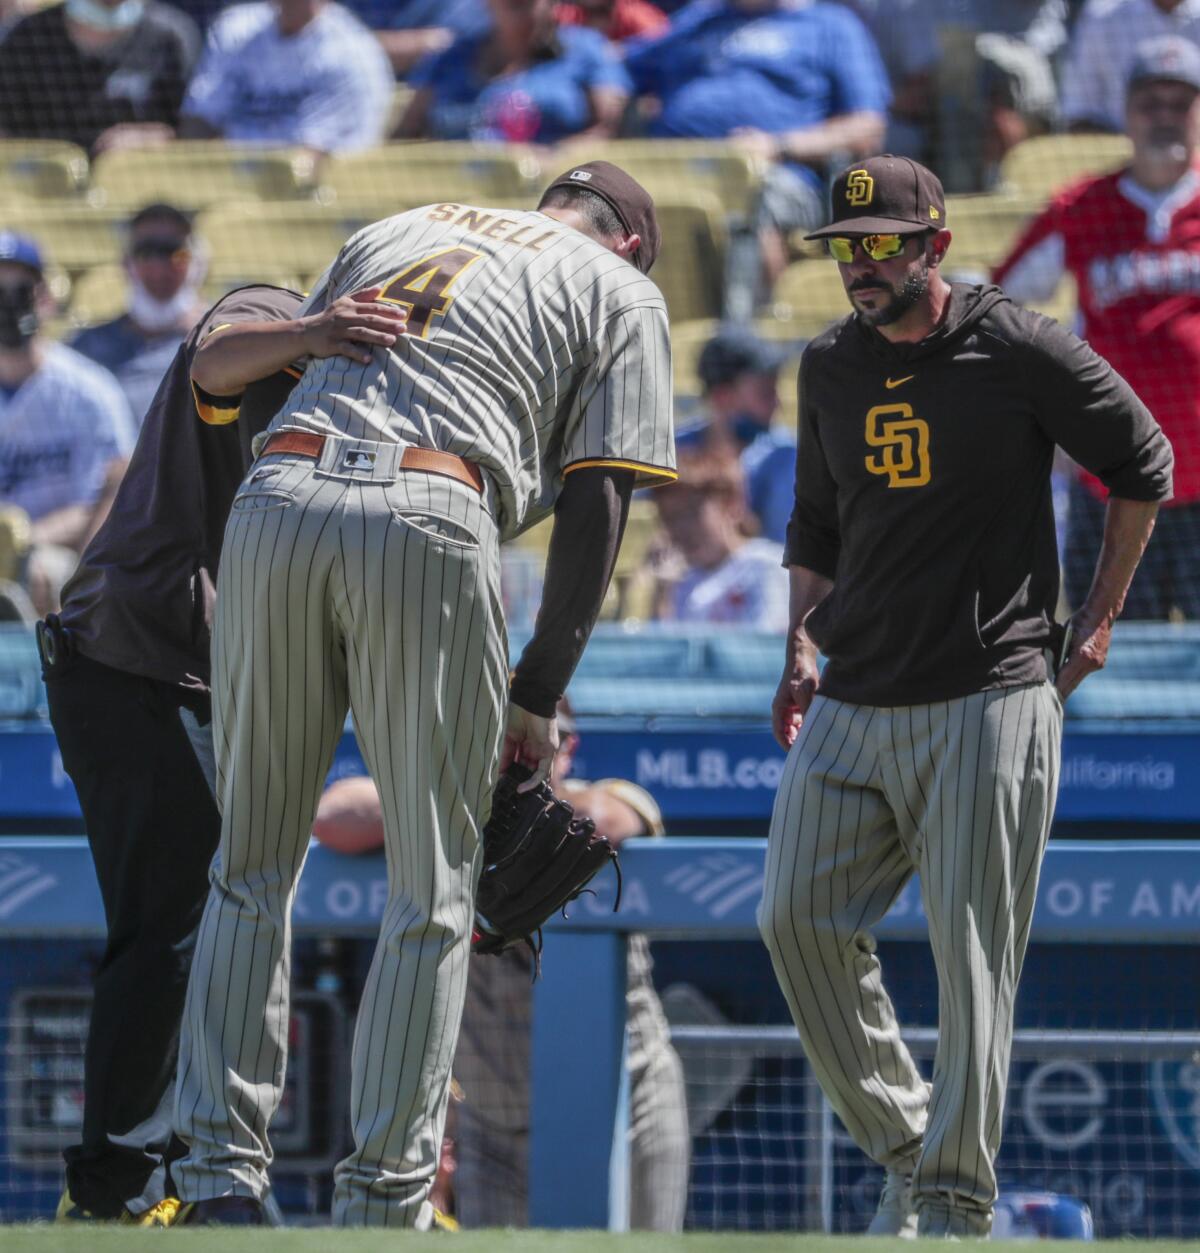 Padres starting pitcher Blake Snell (4) bends over in apparent pain as manager Jayce Tingler approaches.